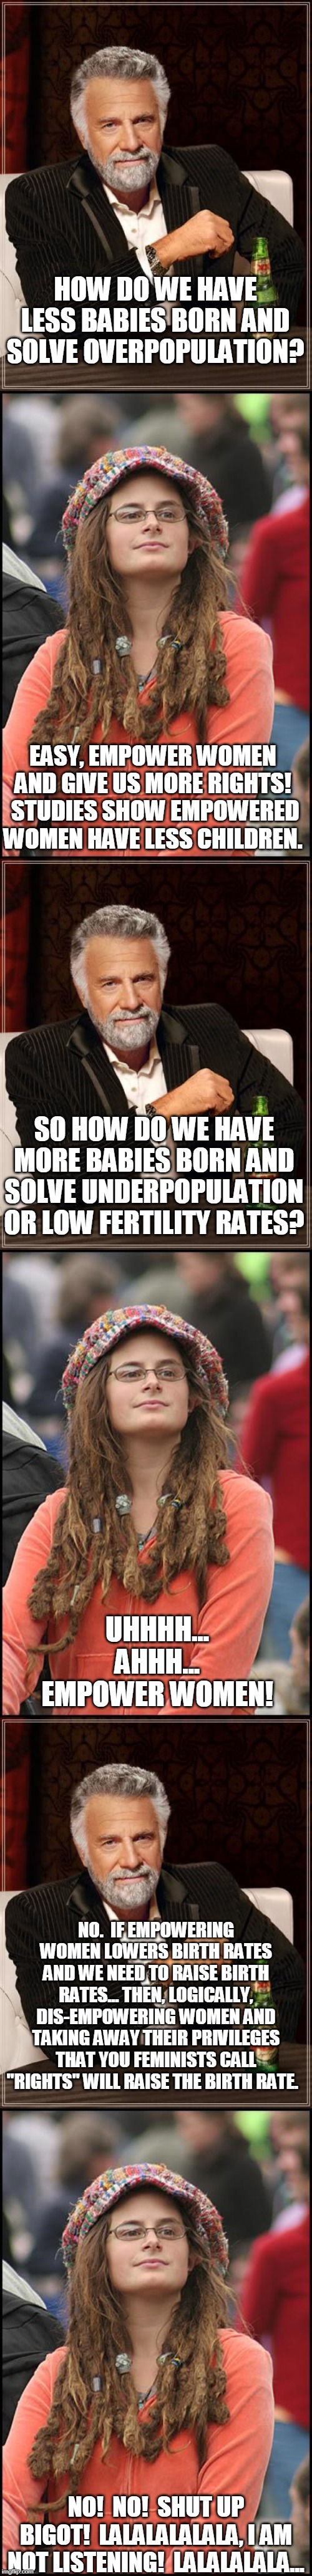 How to fix population problems. | HOW DO WE HAVE LESS BABIES BORN AND SOLVE OVERPOPULATION? EASY, EMPOWER WOMEN AND GIVE US MORE RIGHTS!  STUDIES SHOW EMPOWERED WOMEN HAVE LESS CHILDREN. SO HOW DO WE HAVE MORE BABIES BORN AND SOLVE UNDERPOPULATION OR LOW FERTILITY RATES? UHHHH... AHHH... EMPOWER WOMEN! NO.  IF EMPOWERING WOMEN LOWERS BIRTH RATES AND WE NEED TO RAISE BIRTH RATES... THEN, LOGICALLY, DIS-EMPOWERING WOMEN AND TAKING AWAY THEIR PRIVILEGES THAT YOU FEMINISTS CALL "RIGHTS" WILL RAISE THE BIRTH RATE. NO!  NO!  SHUT UP BIGOT!  LALALALALALA, I AM NOT LISTENING!  LALALALALA... | image tagged in memes,the most interesting man in the world,college liberal,anti-feminism,population,birth | made w/ Imgflip meme maker